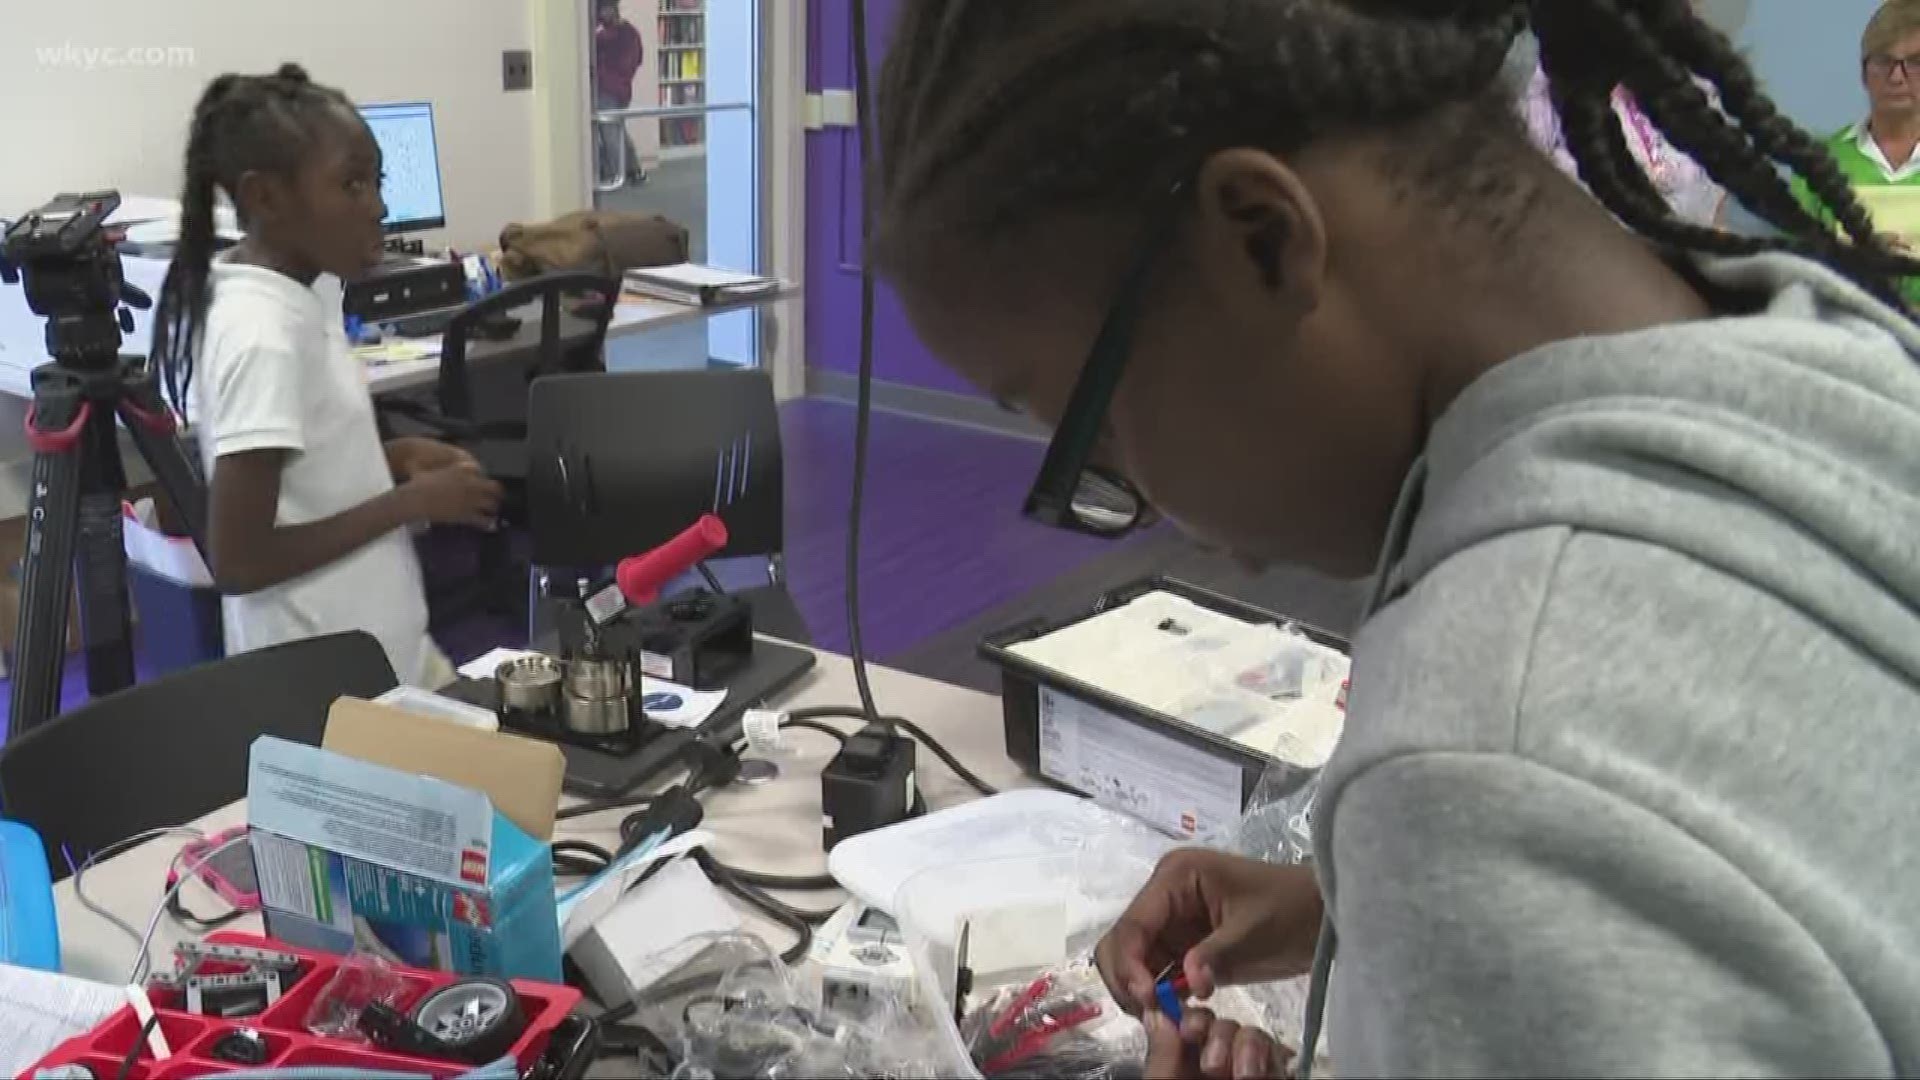 Girls in STEM: Best Buy Teen Tech Center at local library